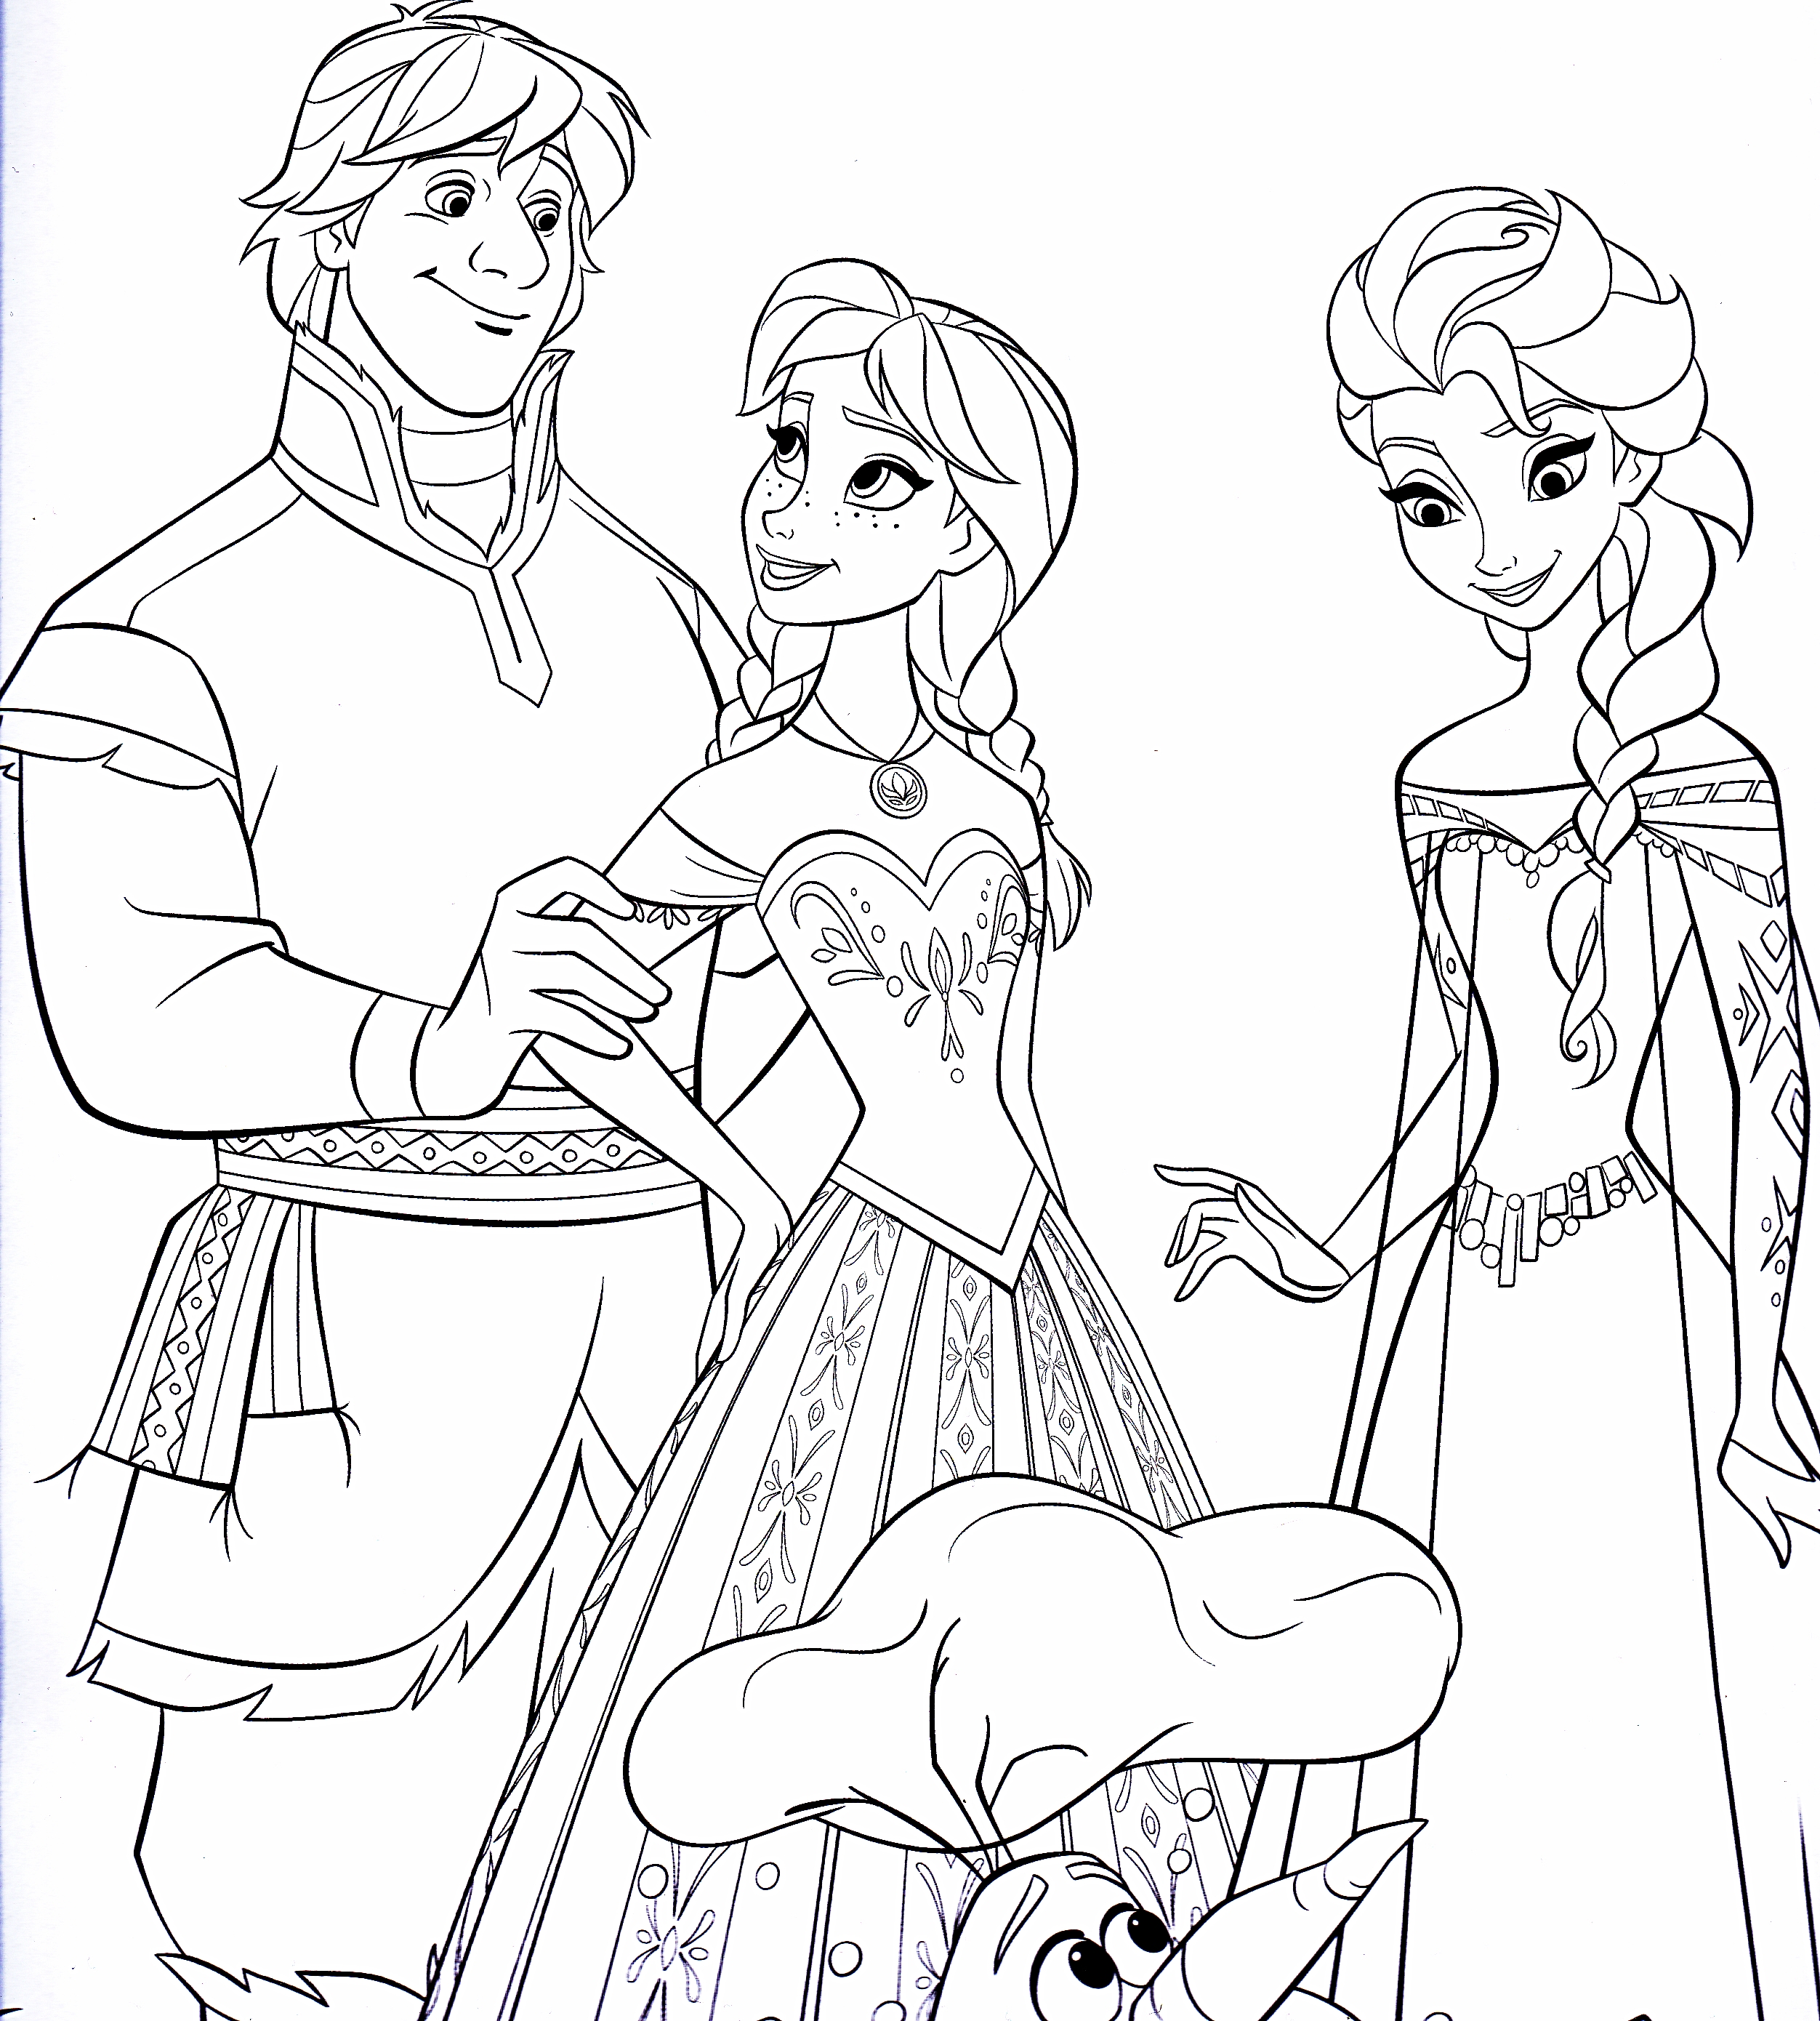 Frozen (Movie) coloring #18, Download drawings